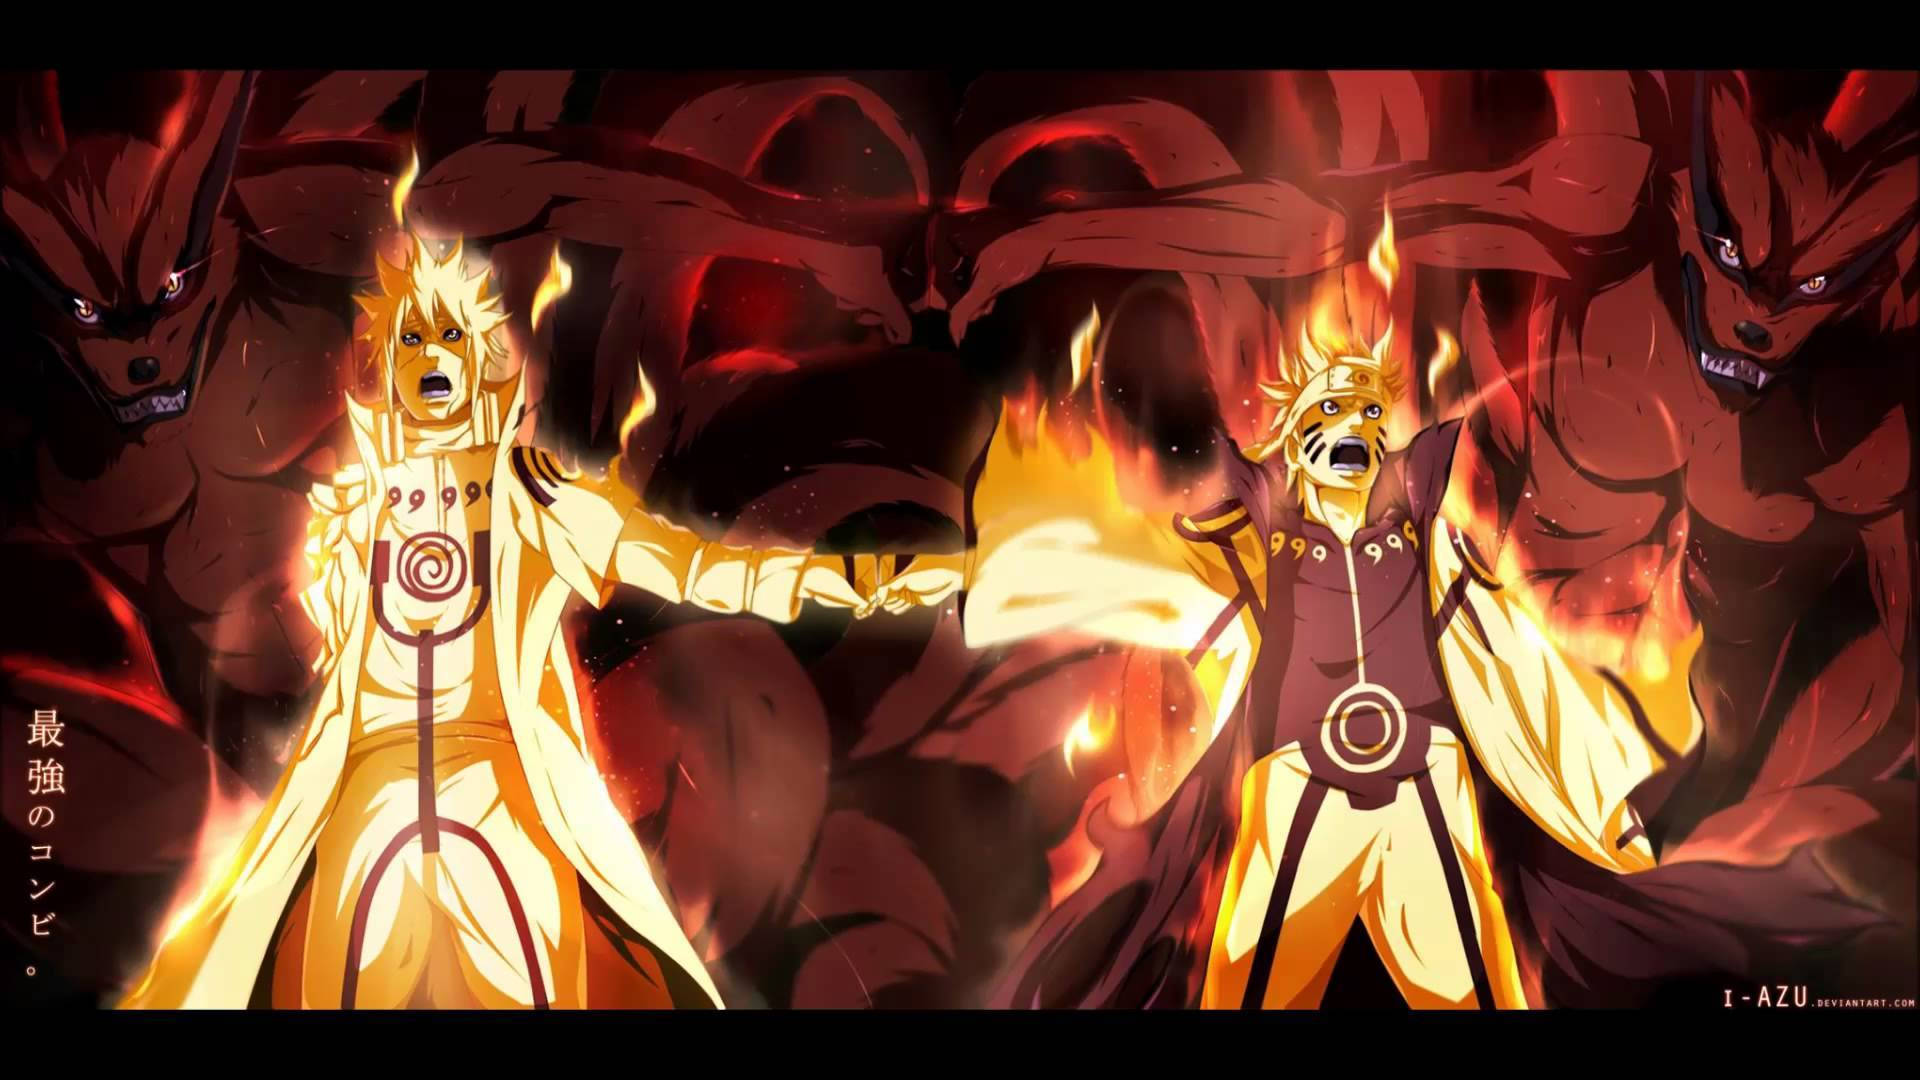 Father and Son Bonding in Naruto Shippudden Wallpaper